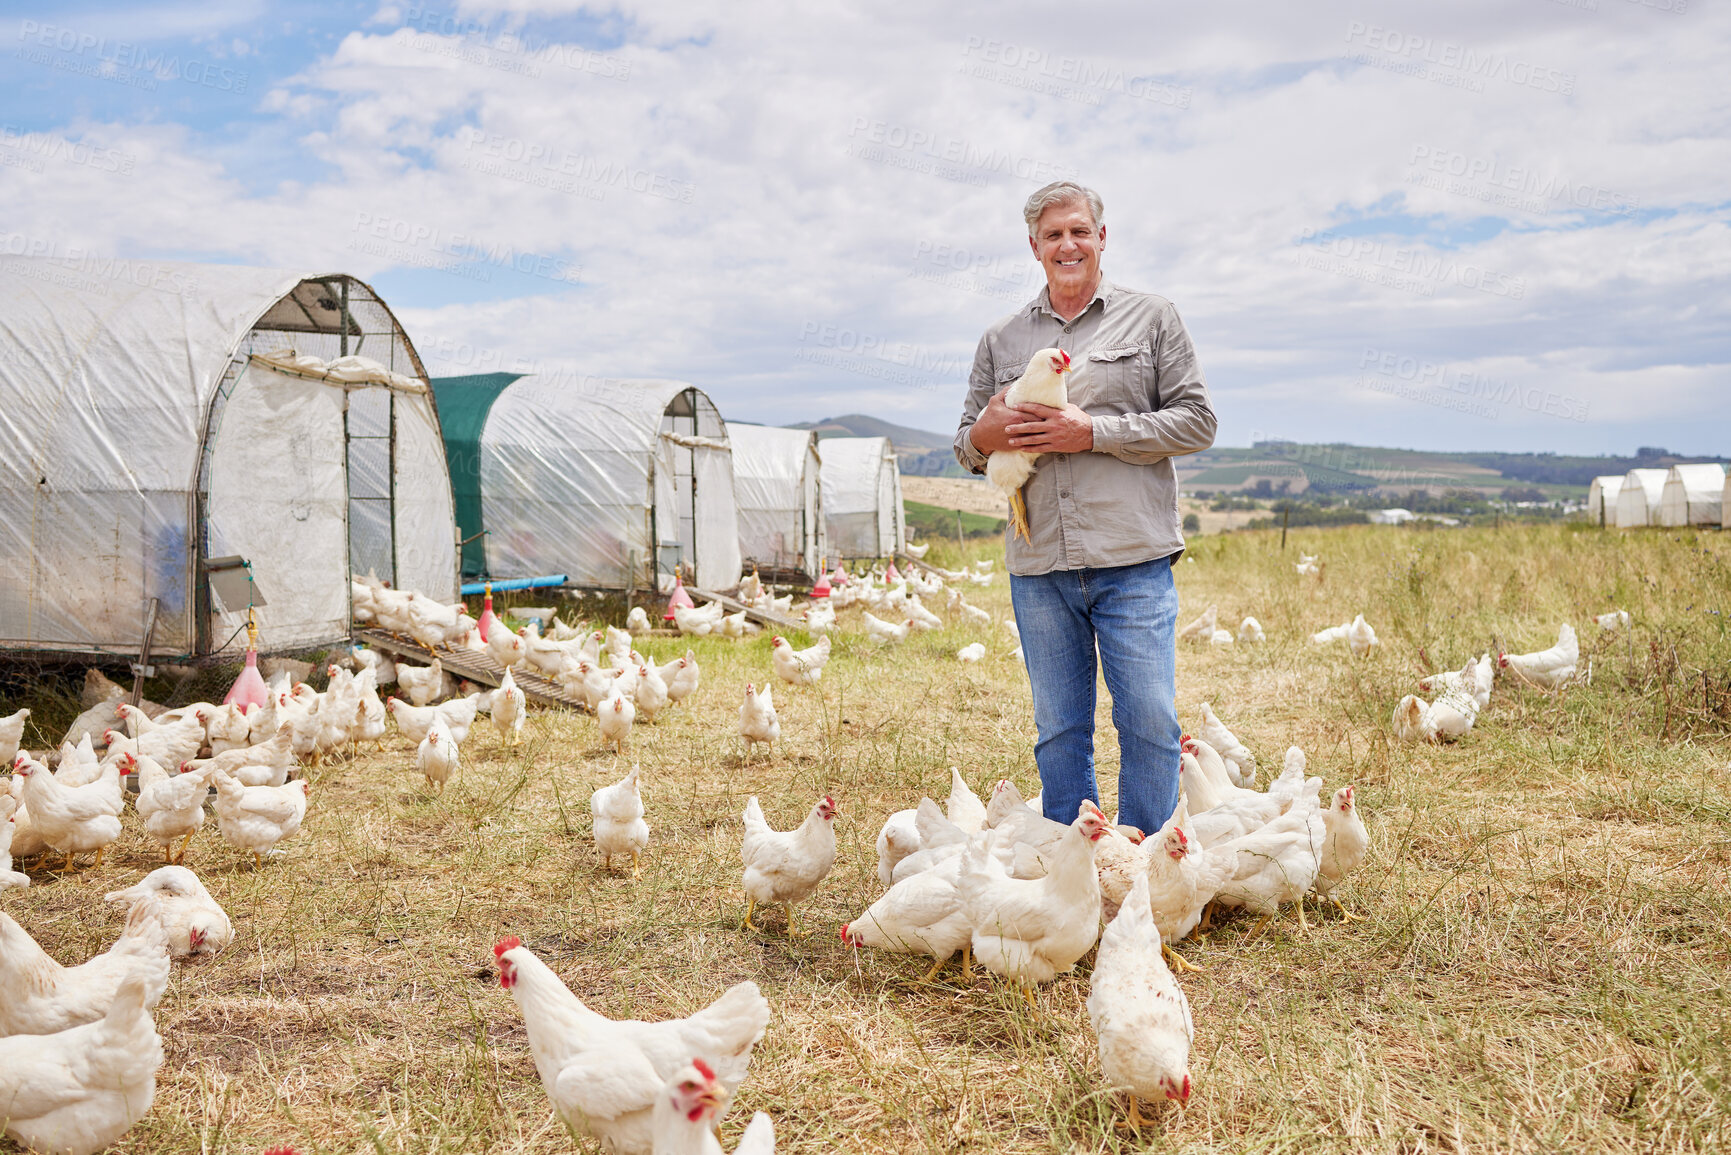 Buy stock photo Portrait of a mature man working on a poultry farm